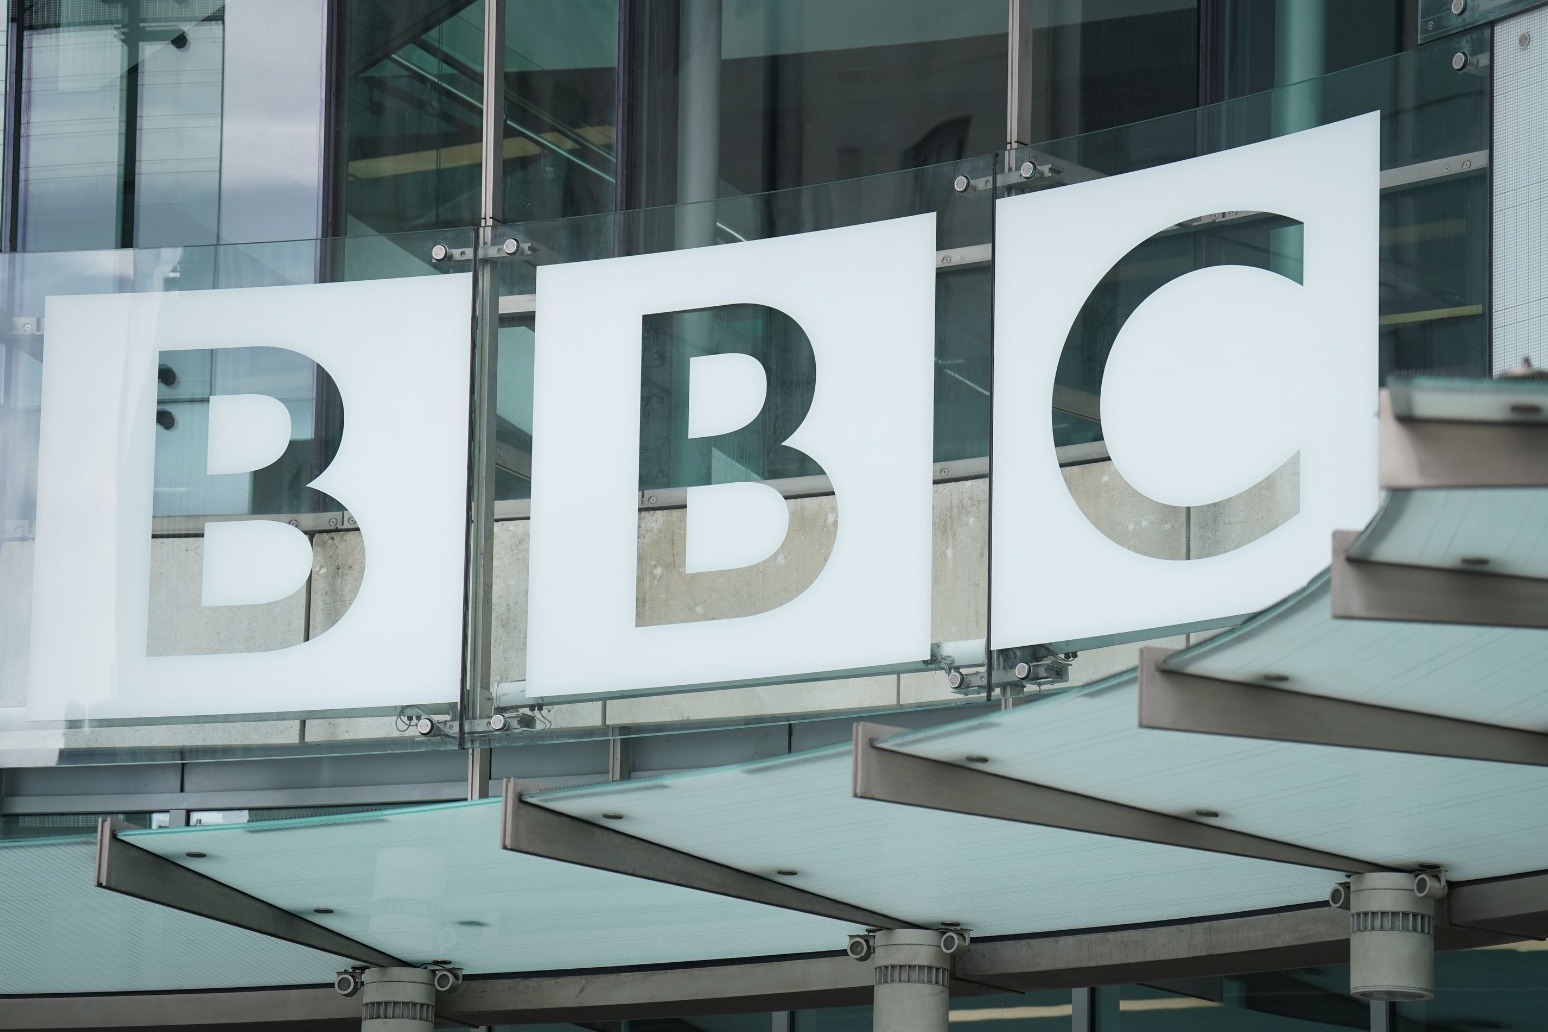 BBC presenter accused of paying teenager for explicit pictures 